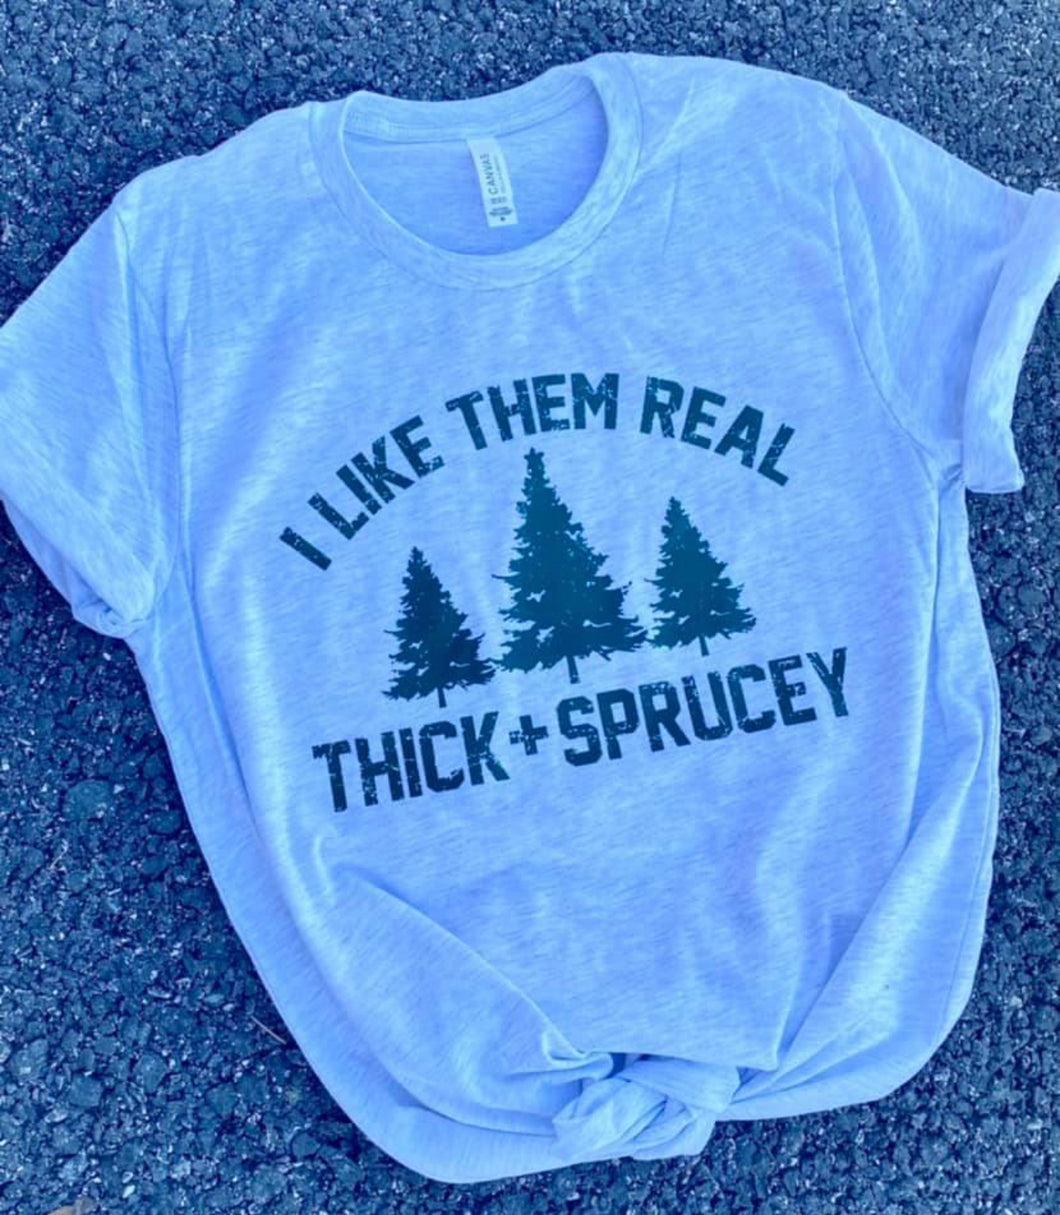 Thick & Sprucey T-shirt